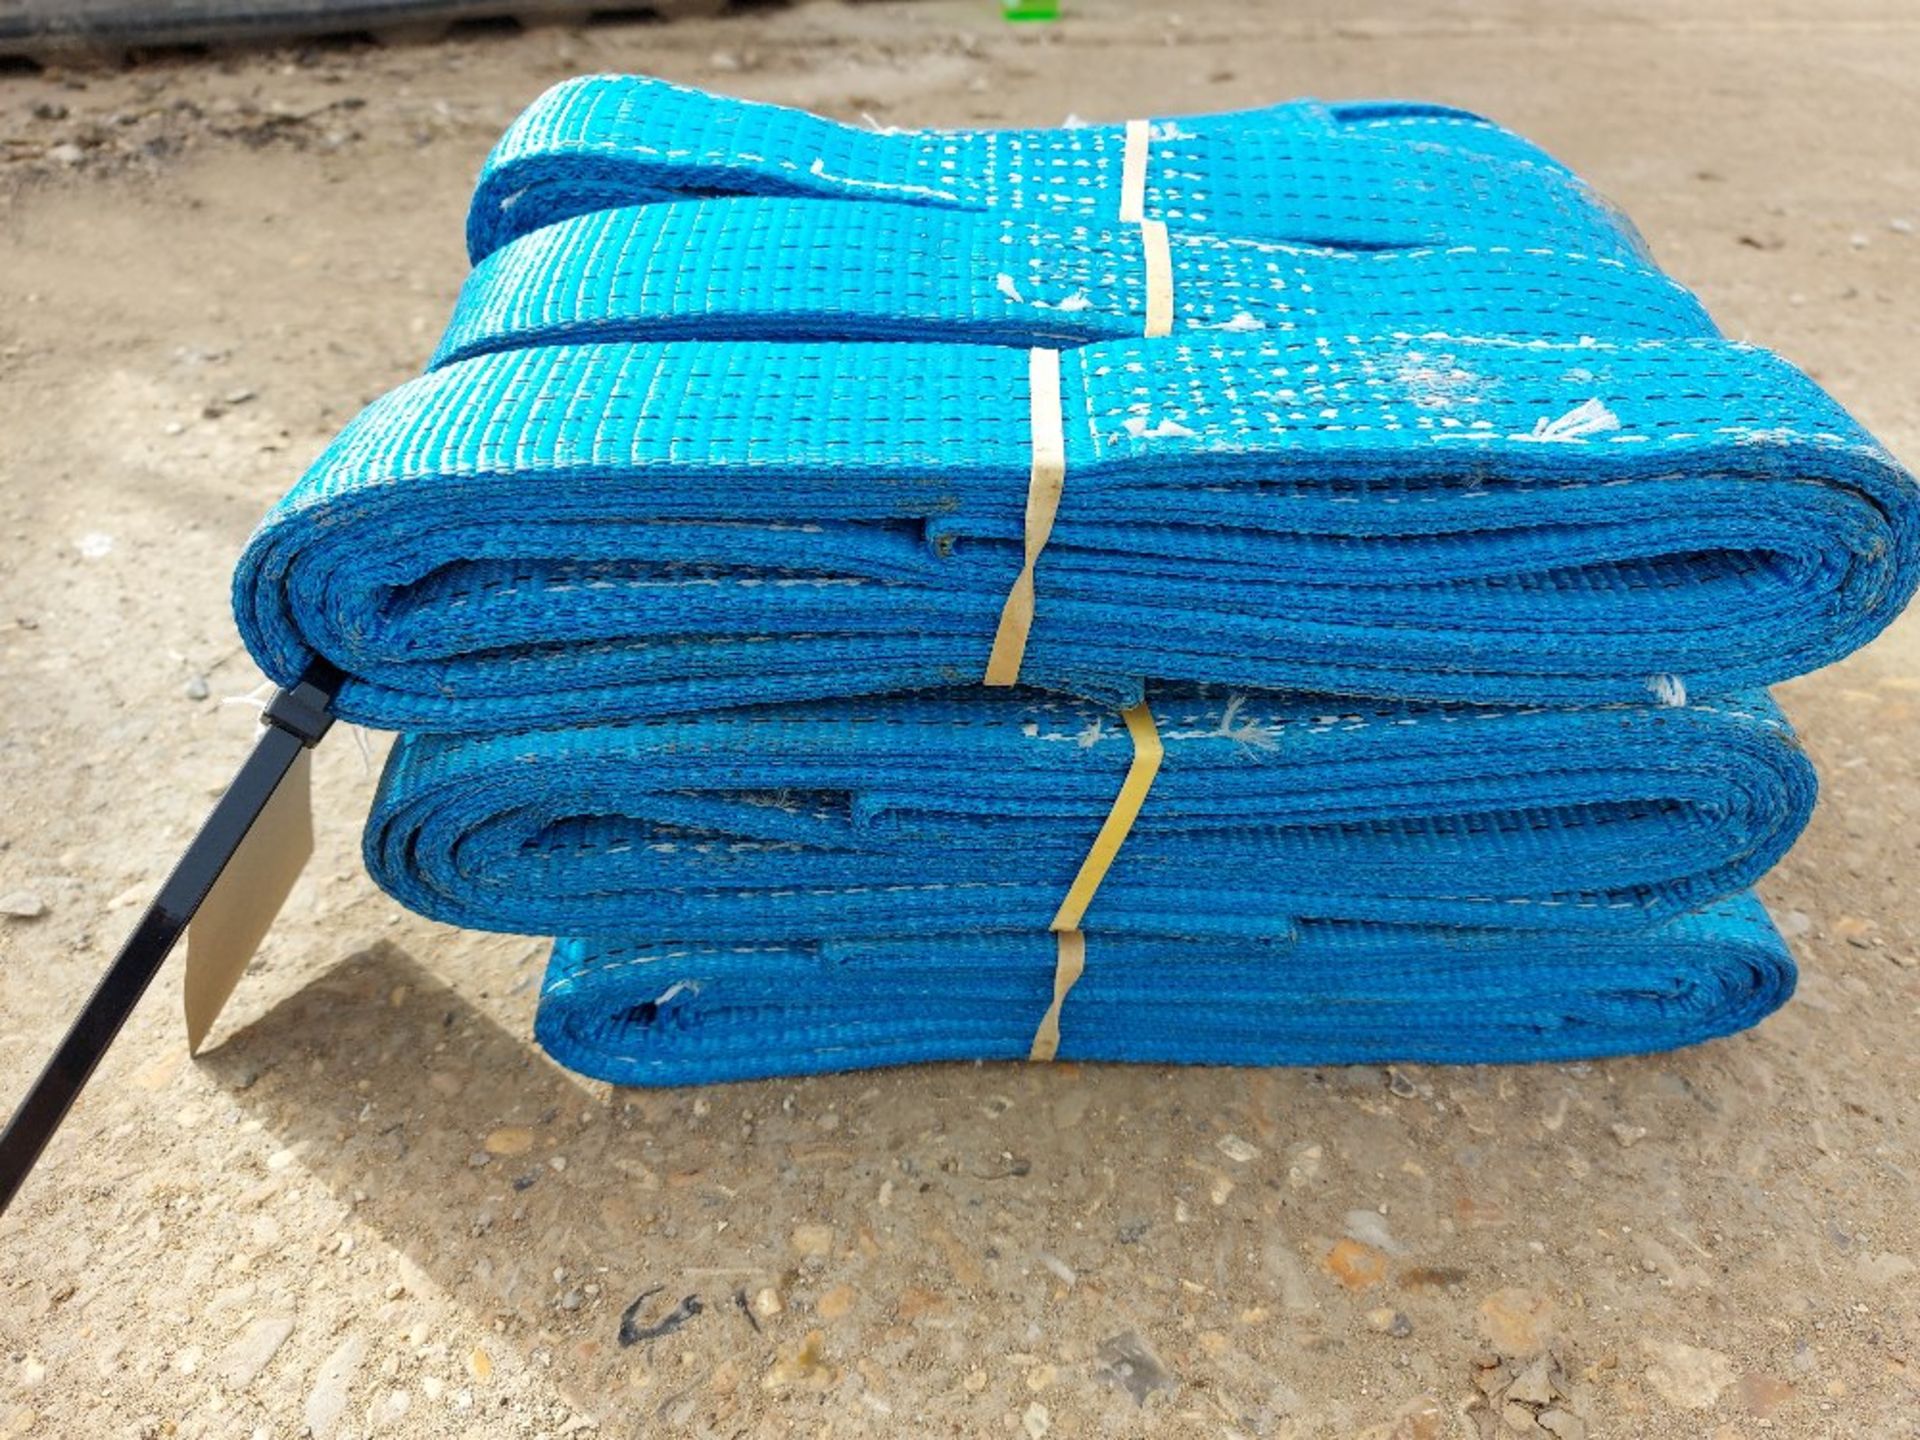 New Quantity of 2m One-way Lifting Sling SWL 2000KG - Image 2 of 2